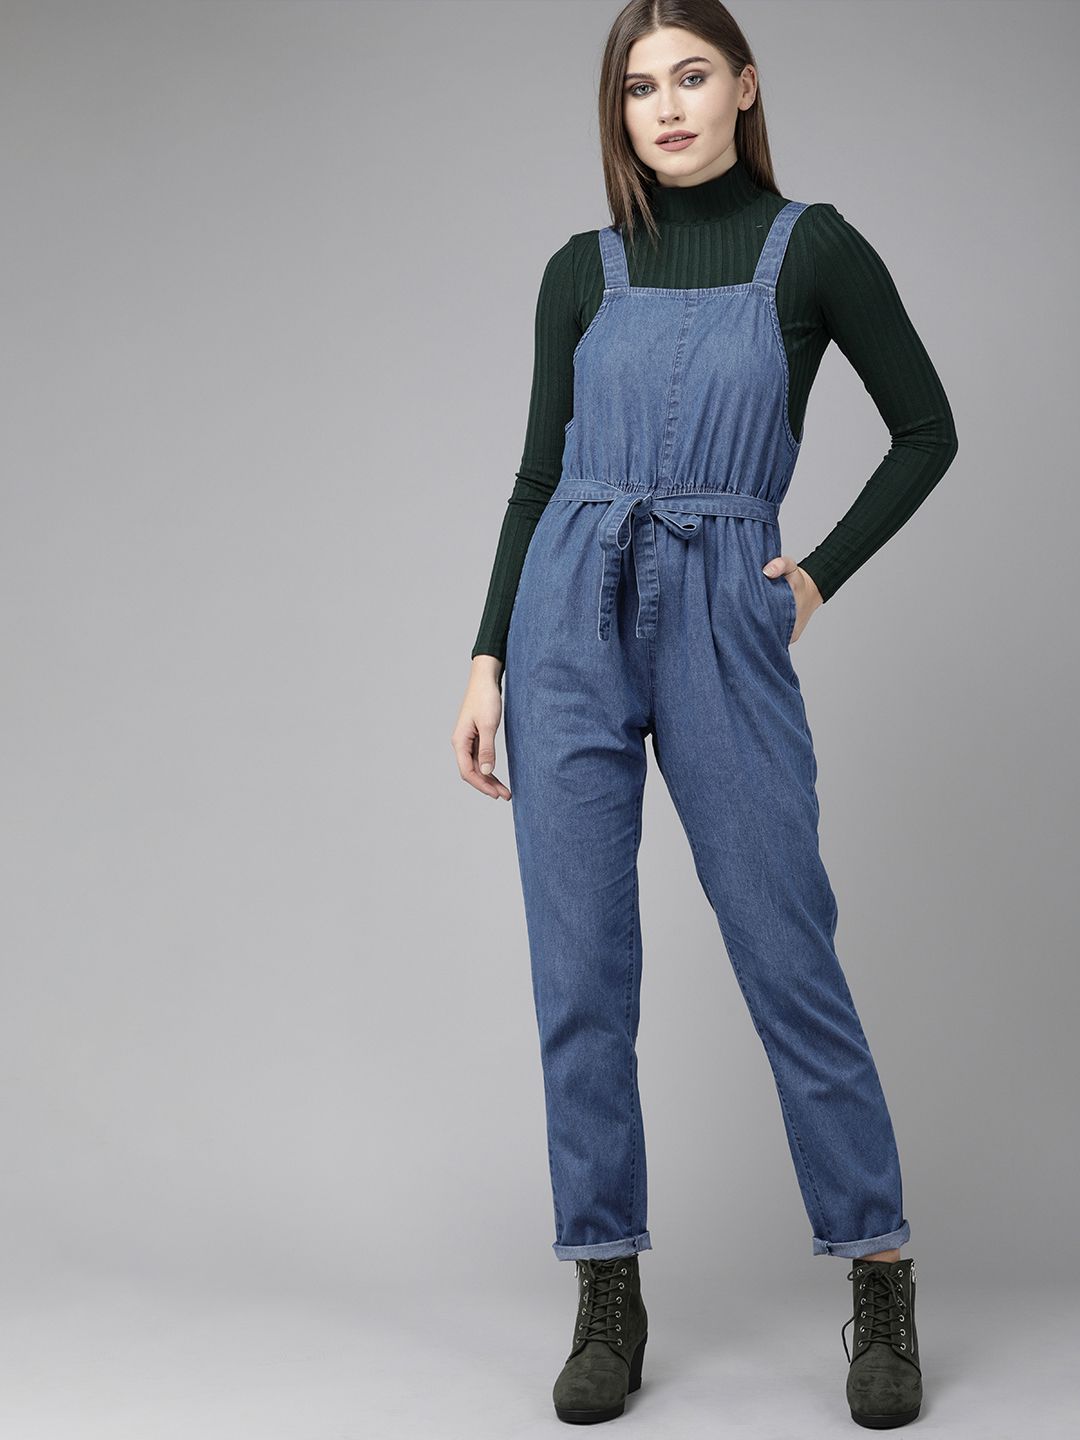 The Roadster Lifestyle Co Blue Waist Tie-Up Basic Denim Jumpsuit Price in India